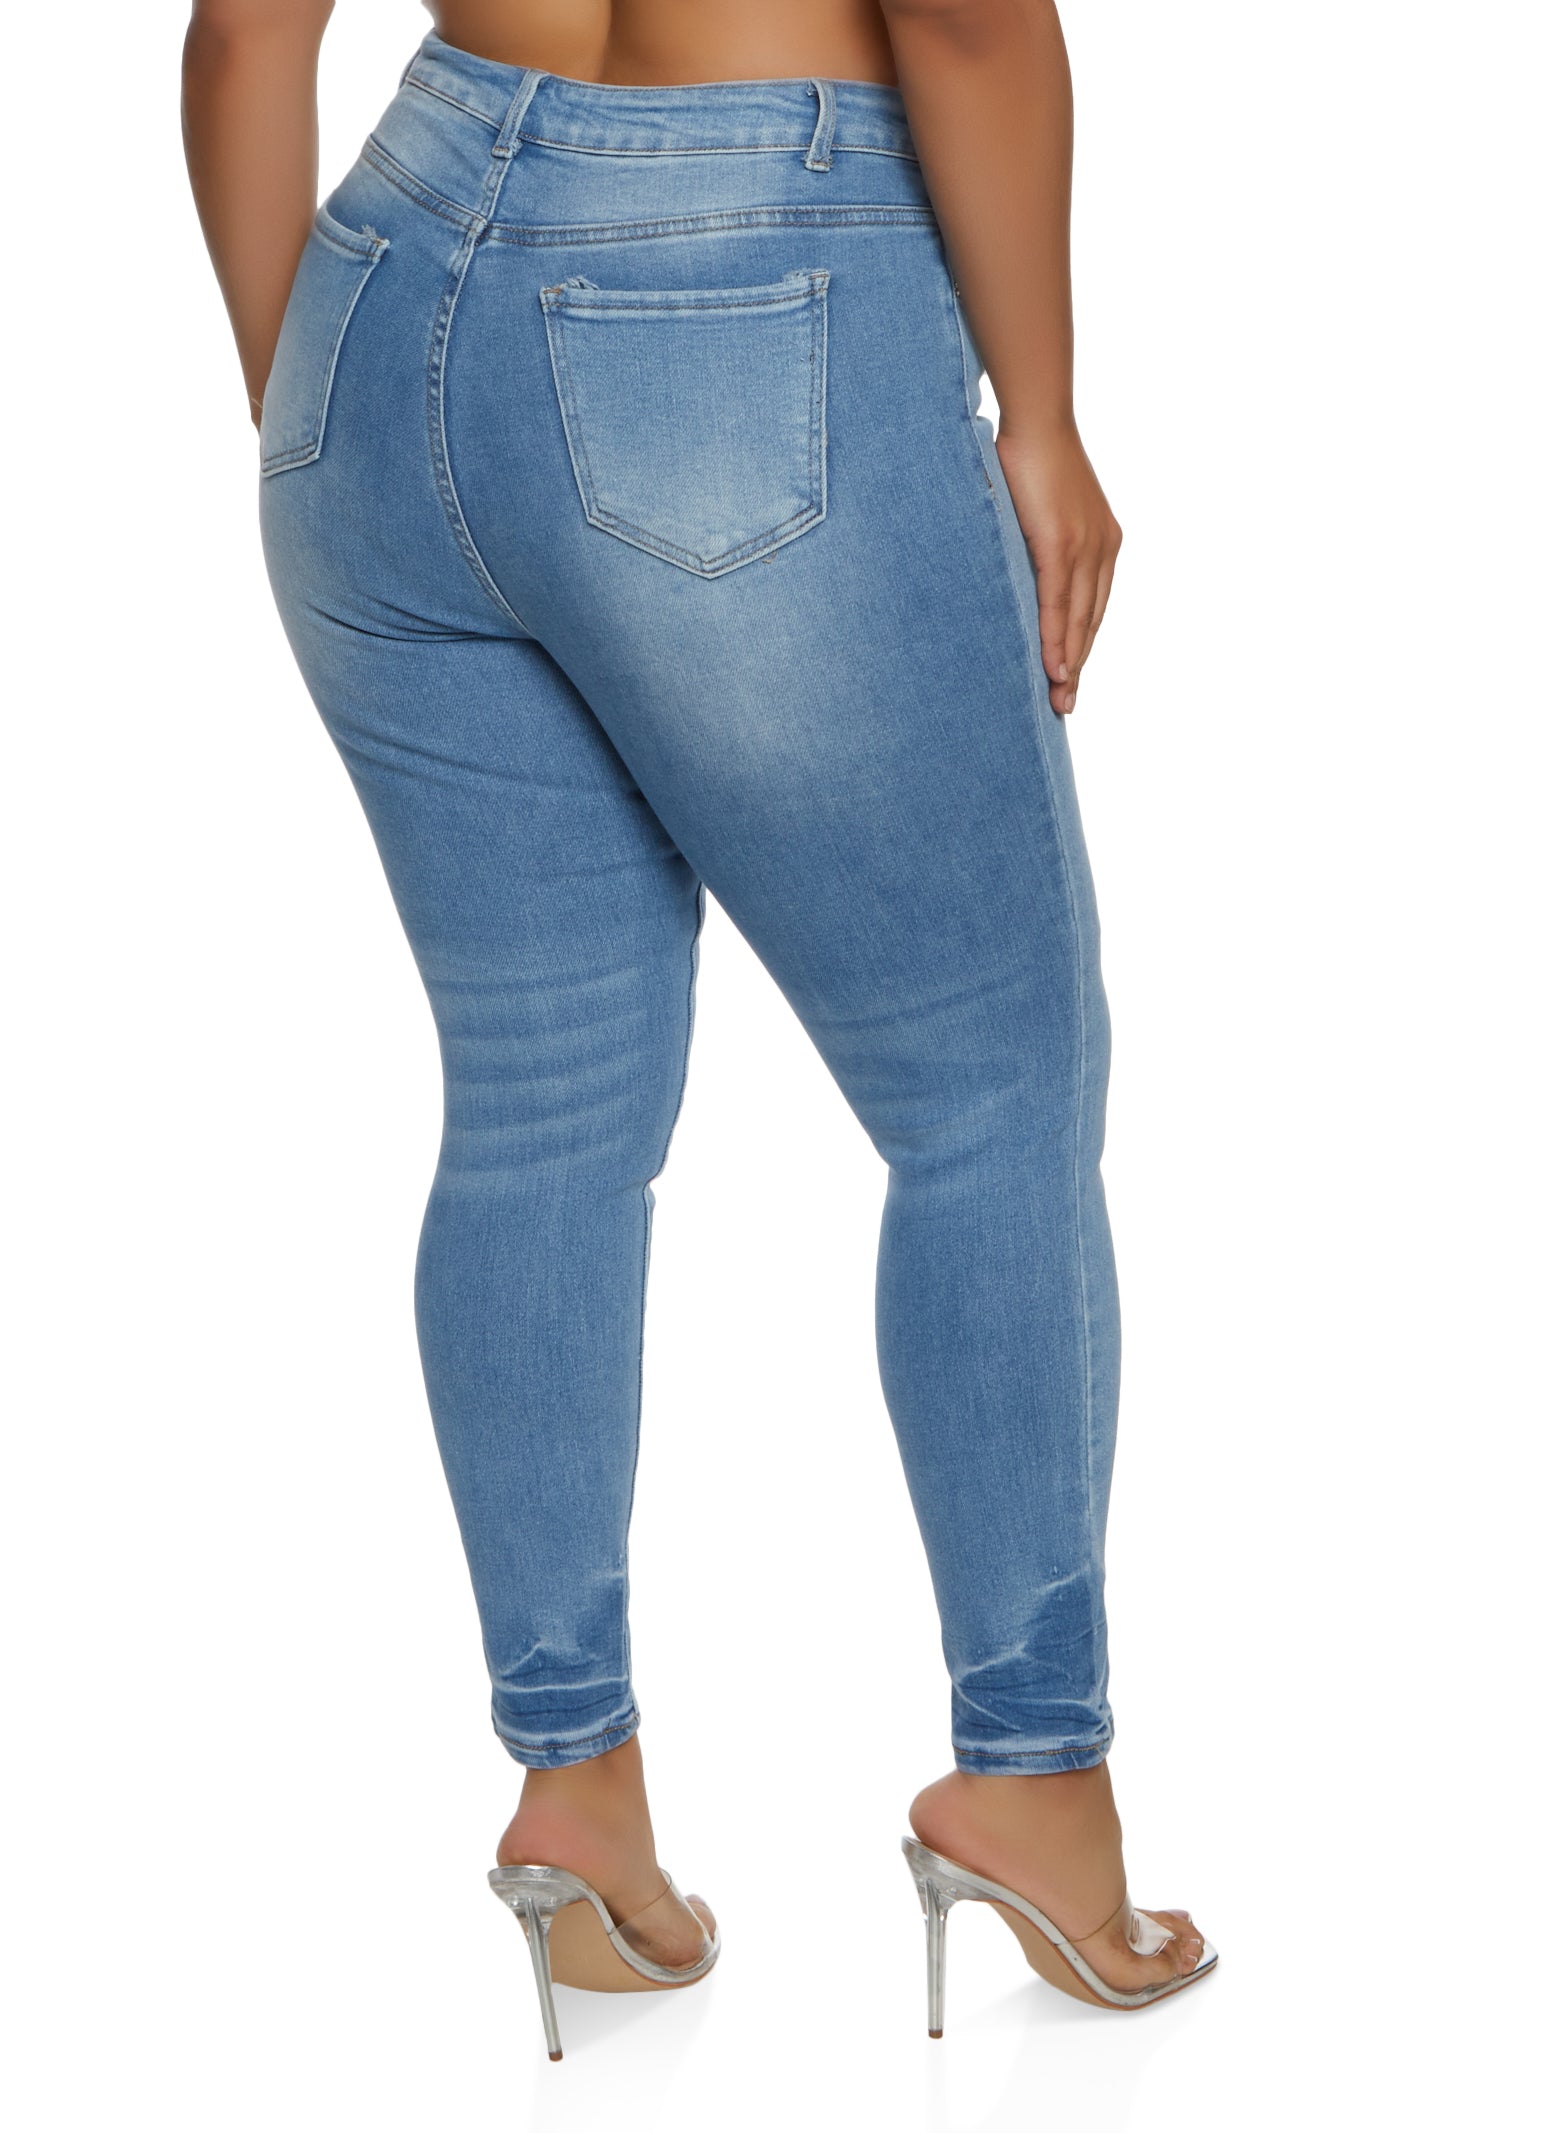 Colombian Jean Shapes Buttocks